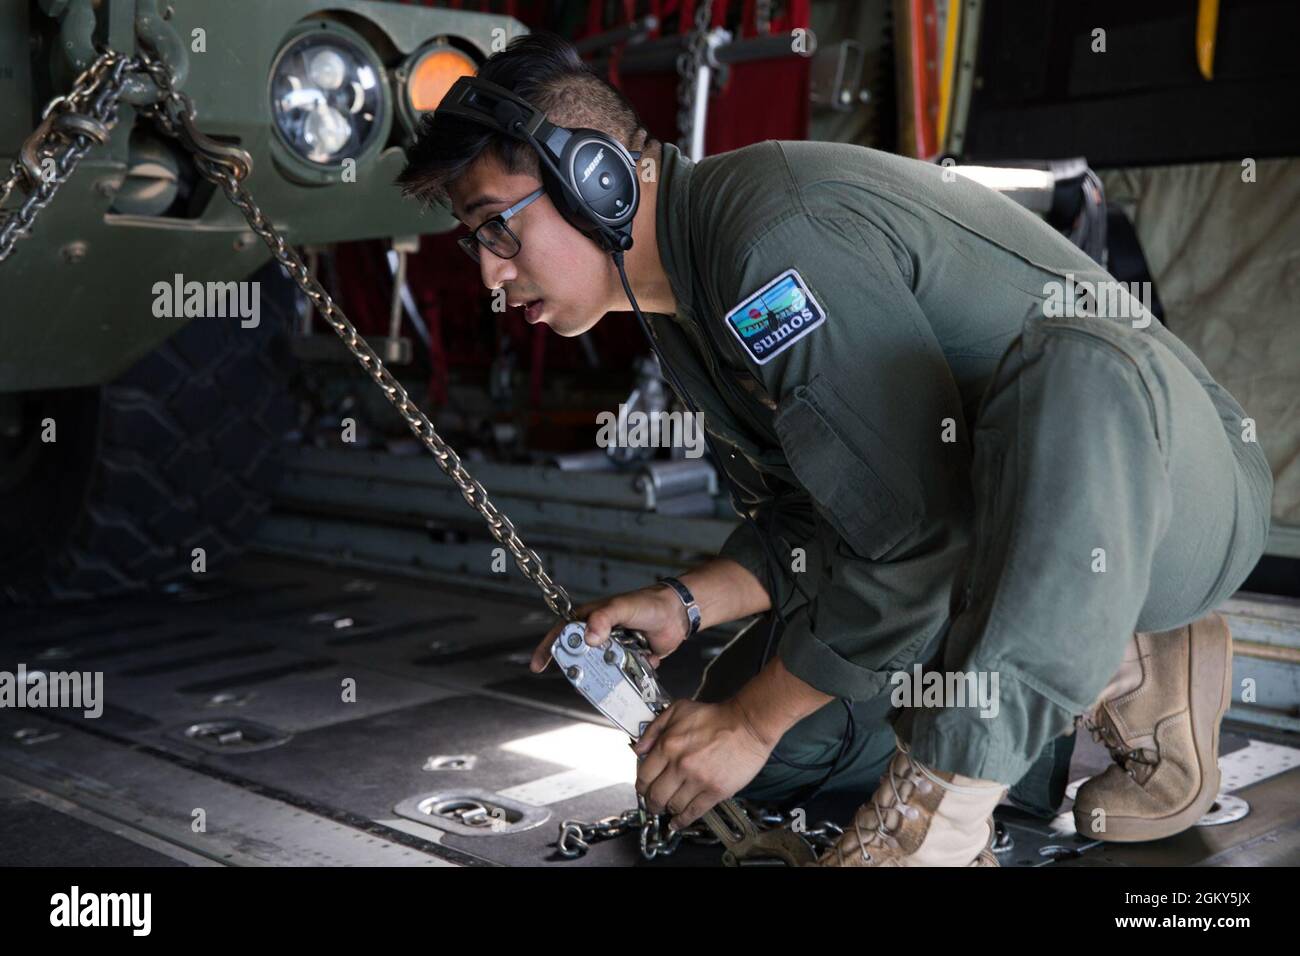 U.S. Marine Corps Sgt. John Madrigal, a loadmaster with Marine Aerial Refueler Transport Squadron (VMGR) 152, chains down a High Mobility Artillery Rocket System vehicle in a KC-130J Super Hercules with VMGR-152 in support of Exercise Talisman Sabre 21 from Whitsunday Coast Airport, Queensland, Australia, July 25, 2021. Australian and U.S. Forces combine biannually for Talisman Sabre, a month-long multi-domain exercise that strengthens allied and partner capabilities to respond to the full range of Indo-Pacific security concerns. Stock Photo